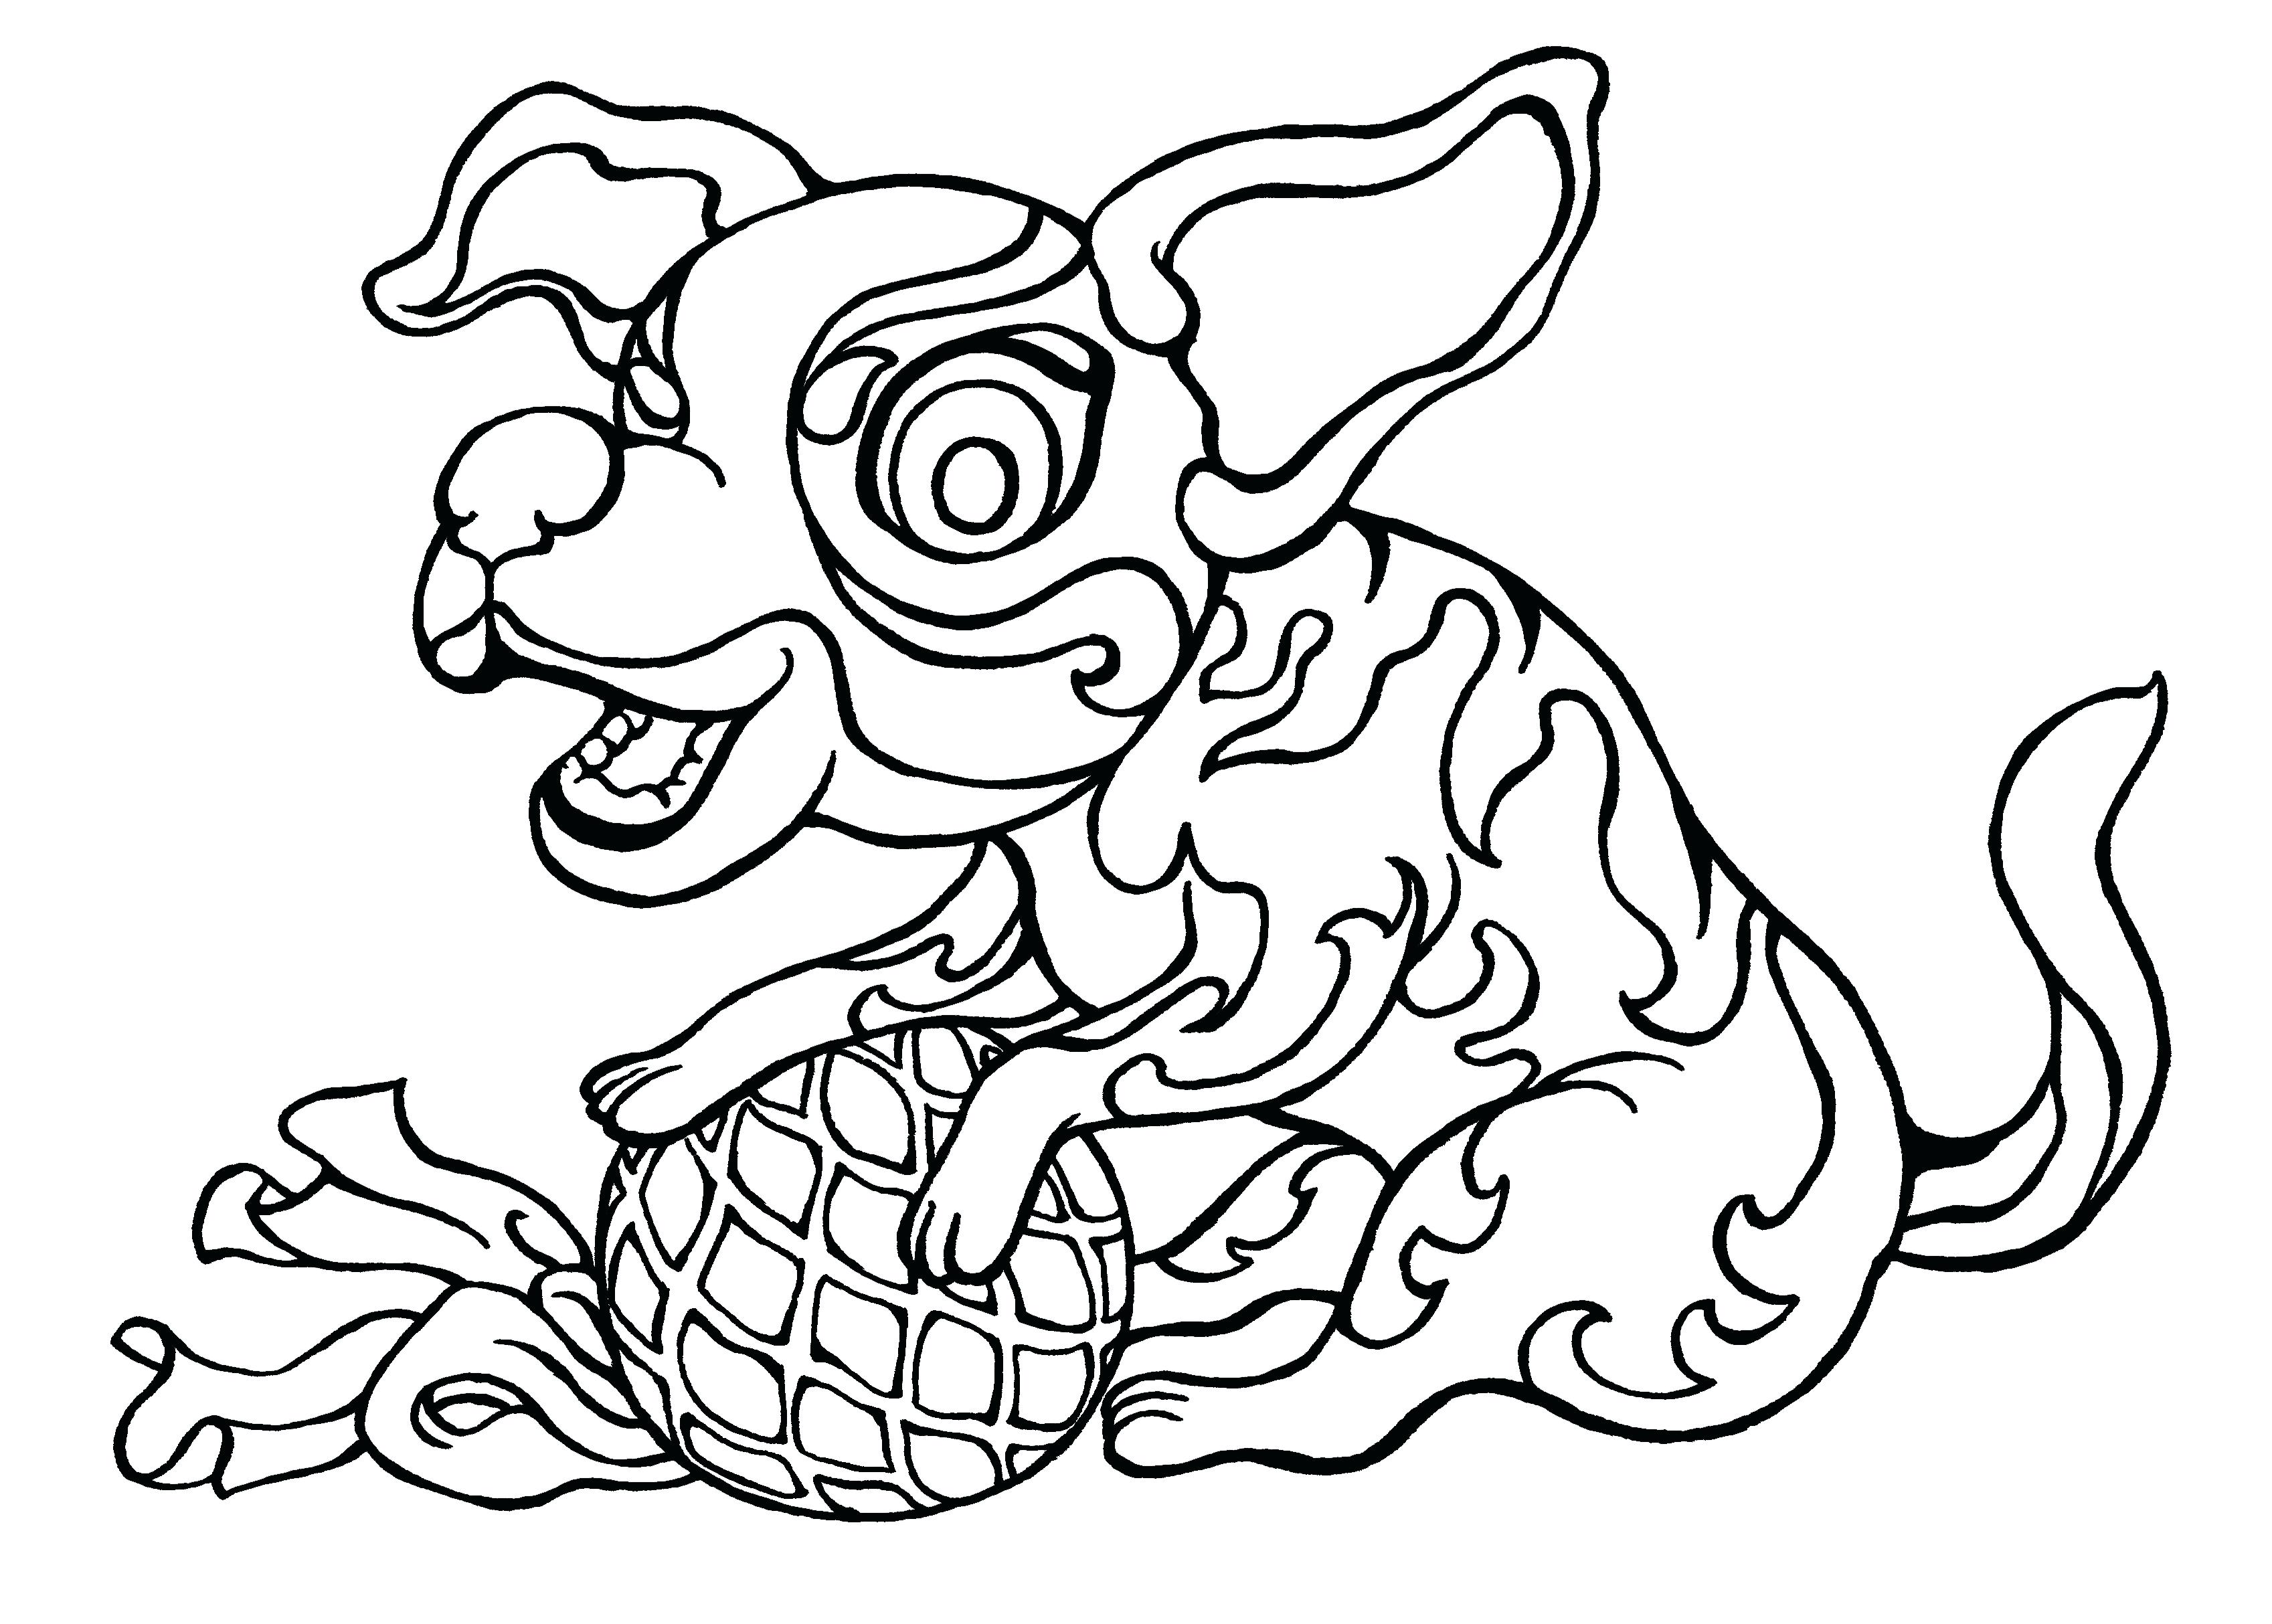 Dragon Boat Coloring Pages at GetColorings.com | Free printable ...